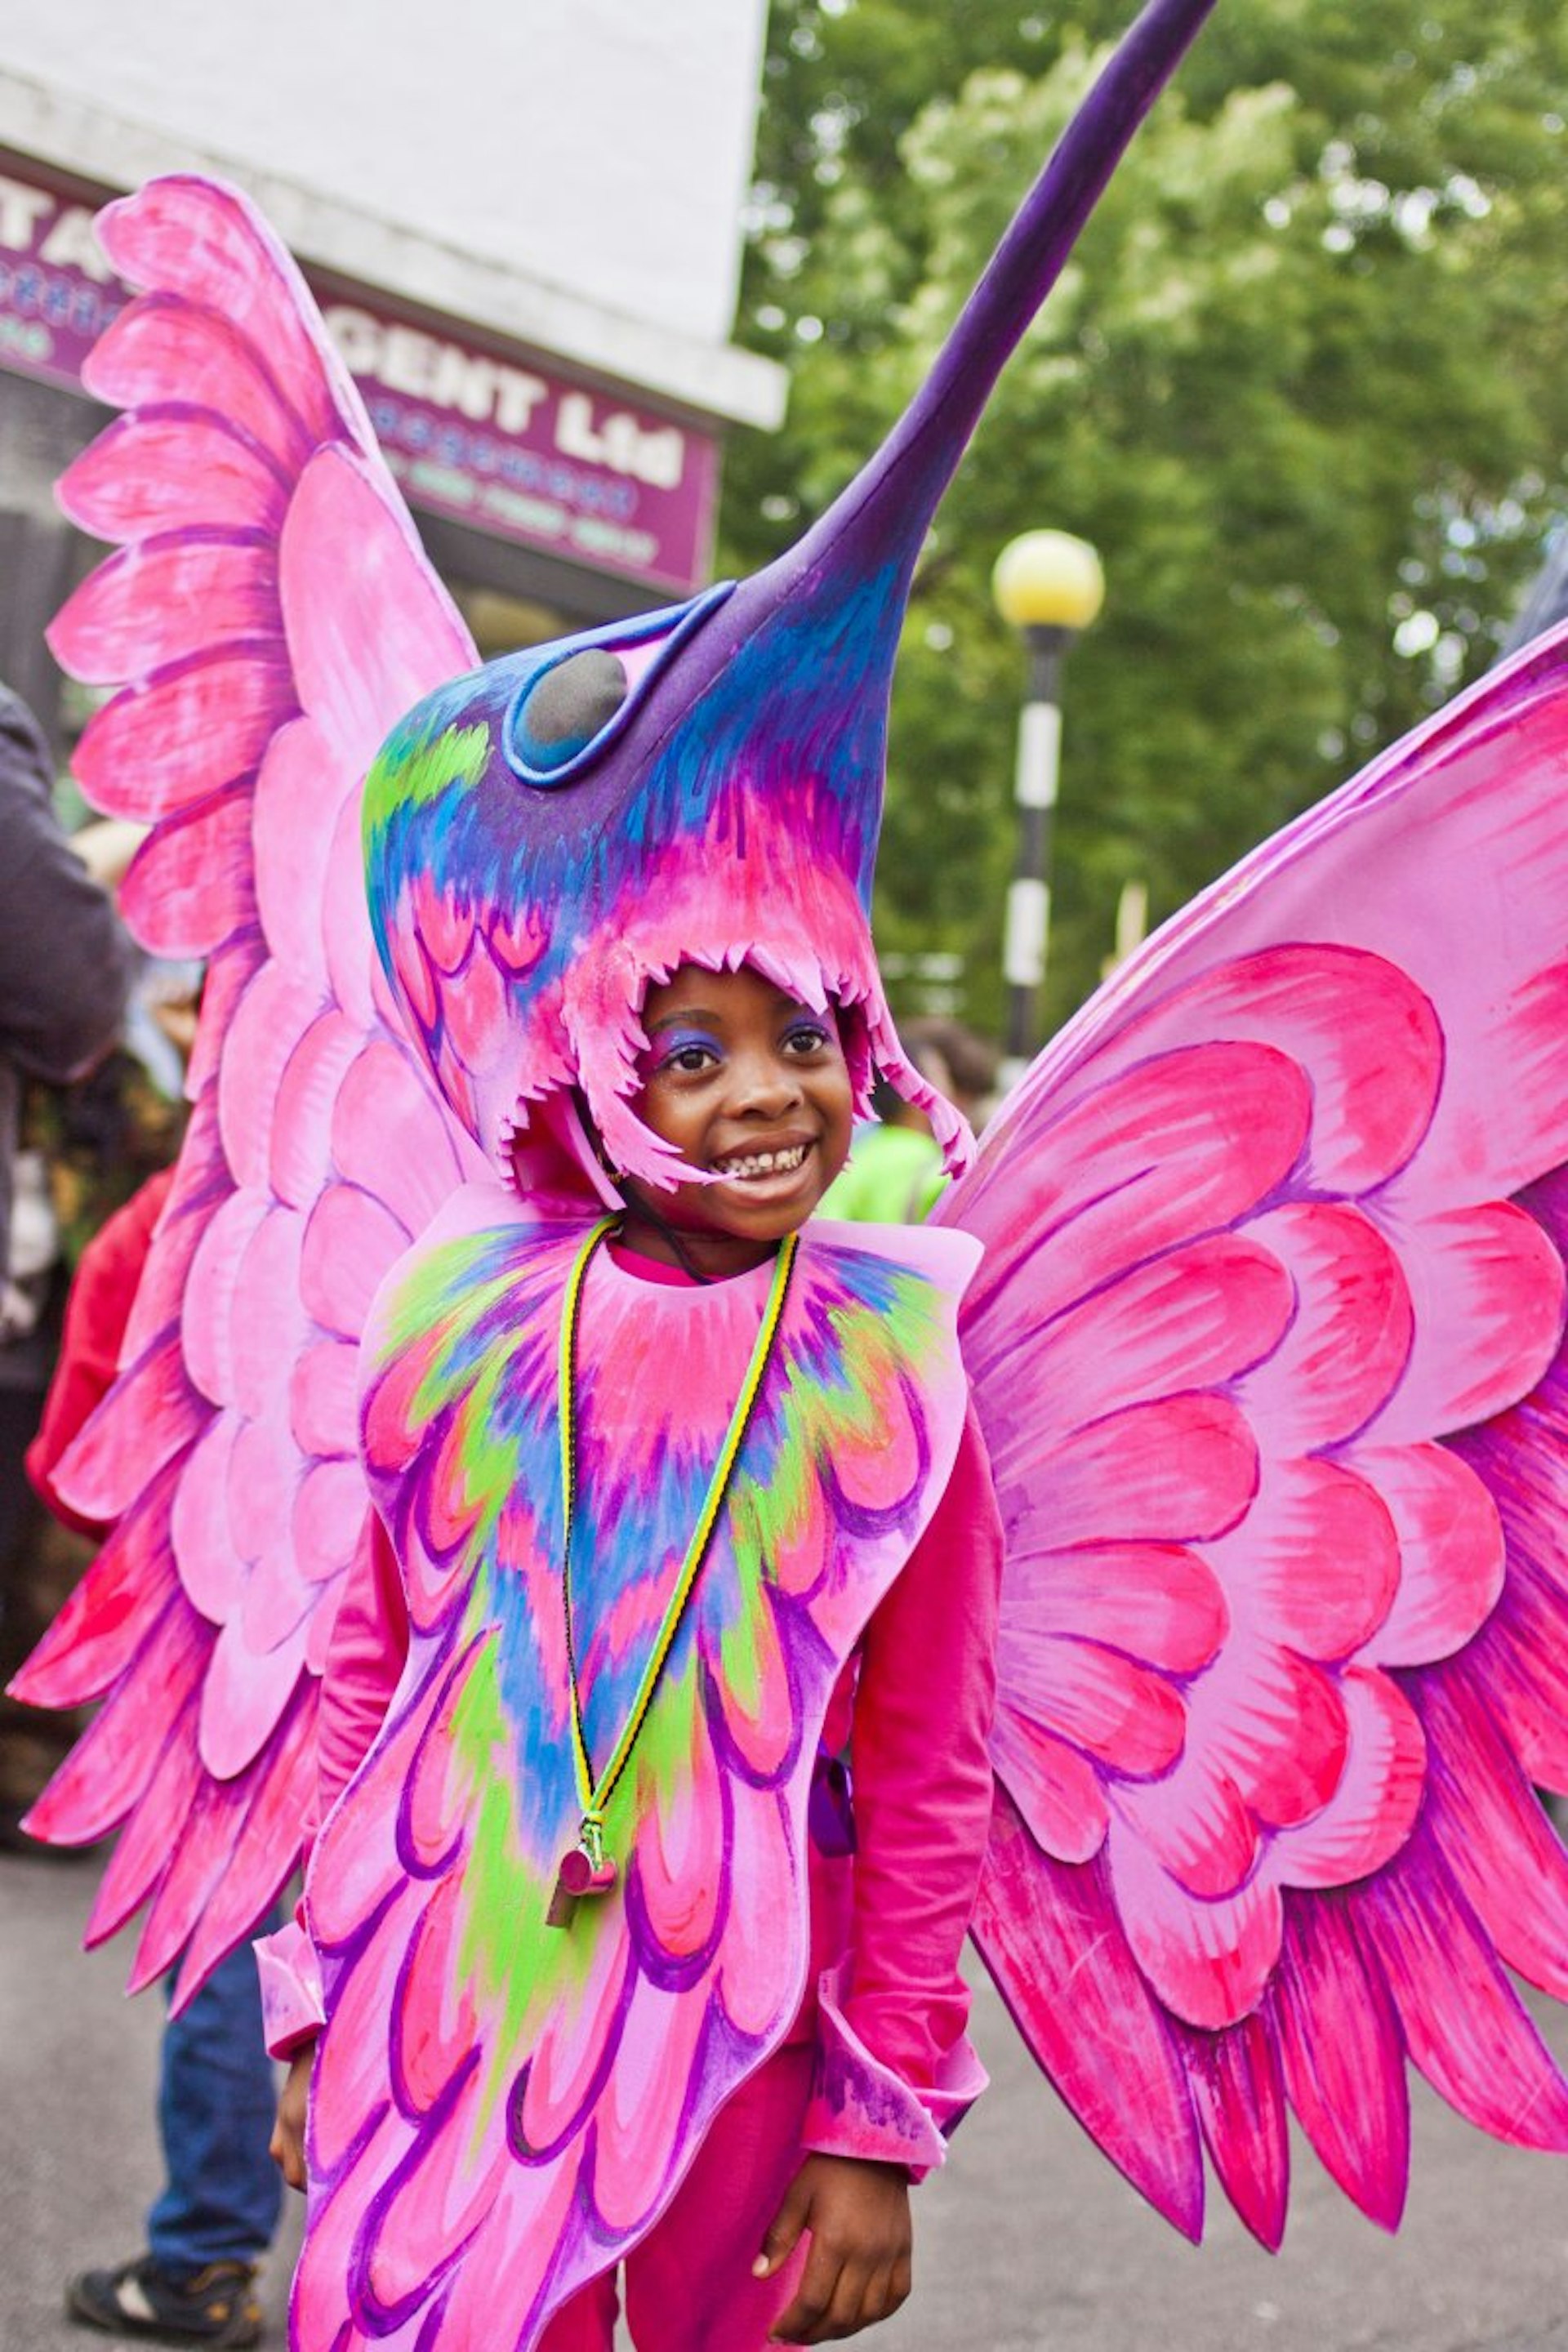 A child is dressed in a bright pink bird costume, with elaborate wings and a headdress including eyes and a blue beak